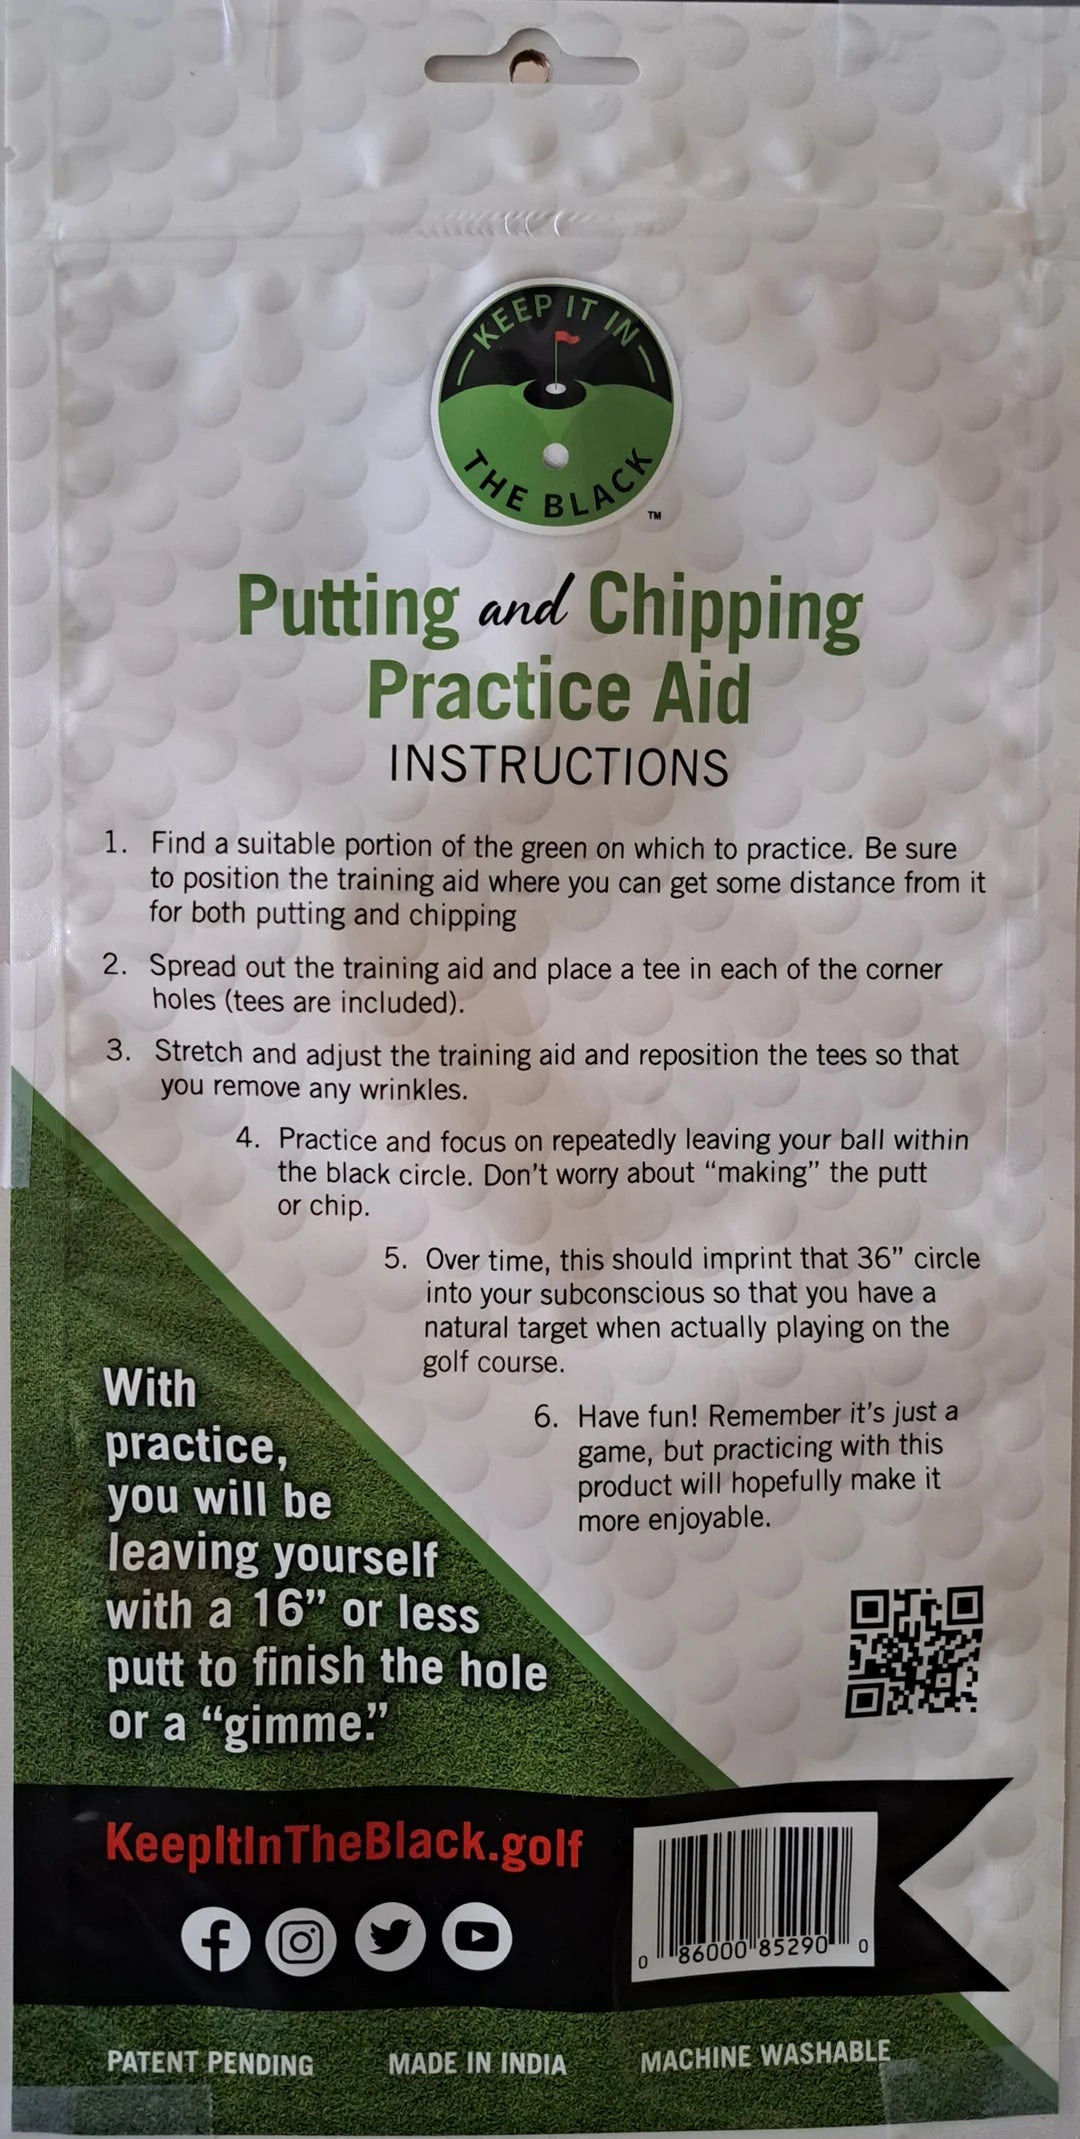 Keep It In the Black - Putting & Chipping Training Aid